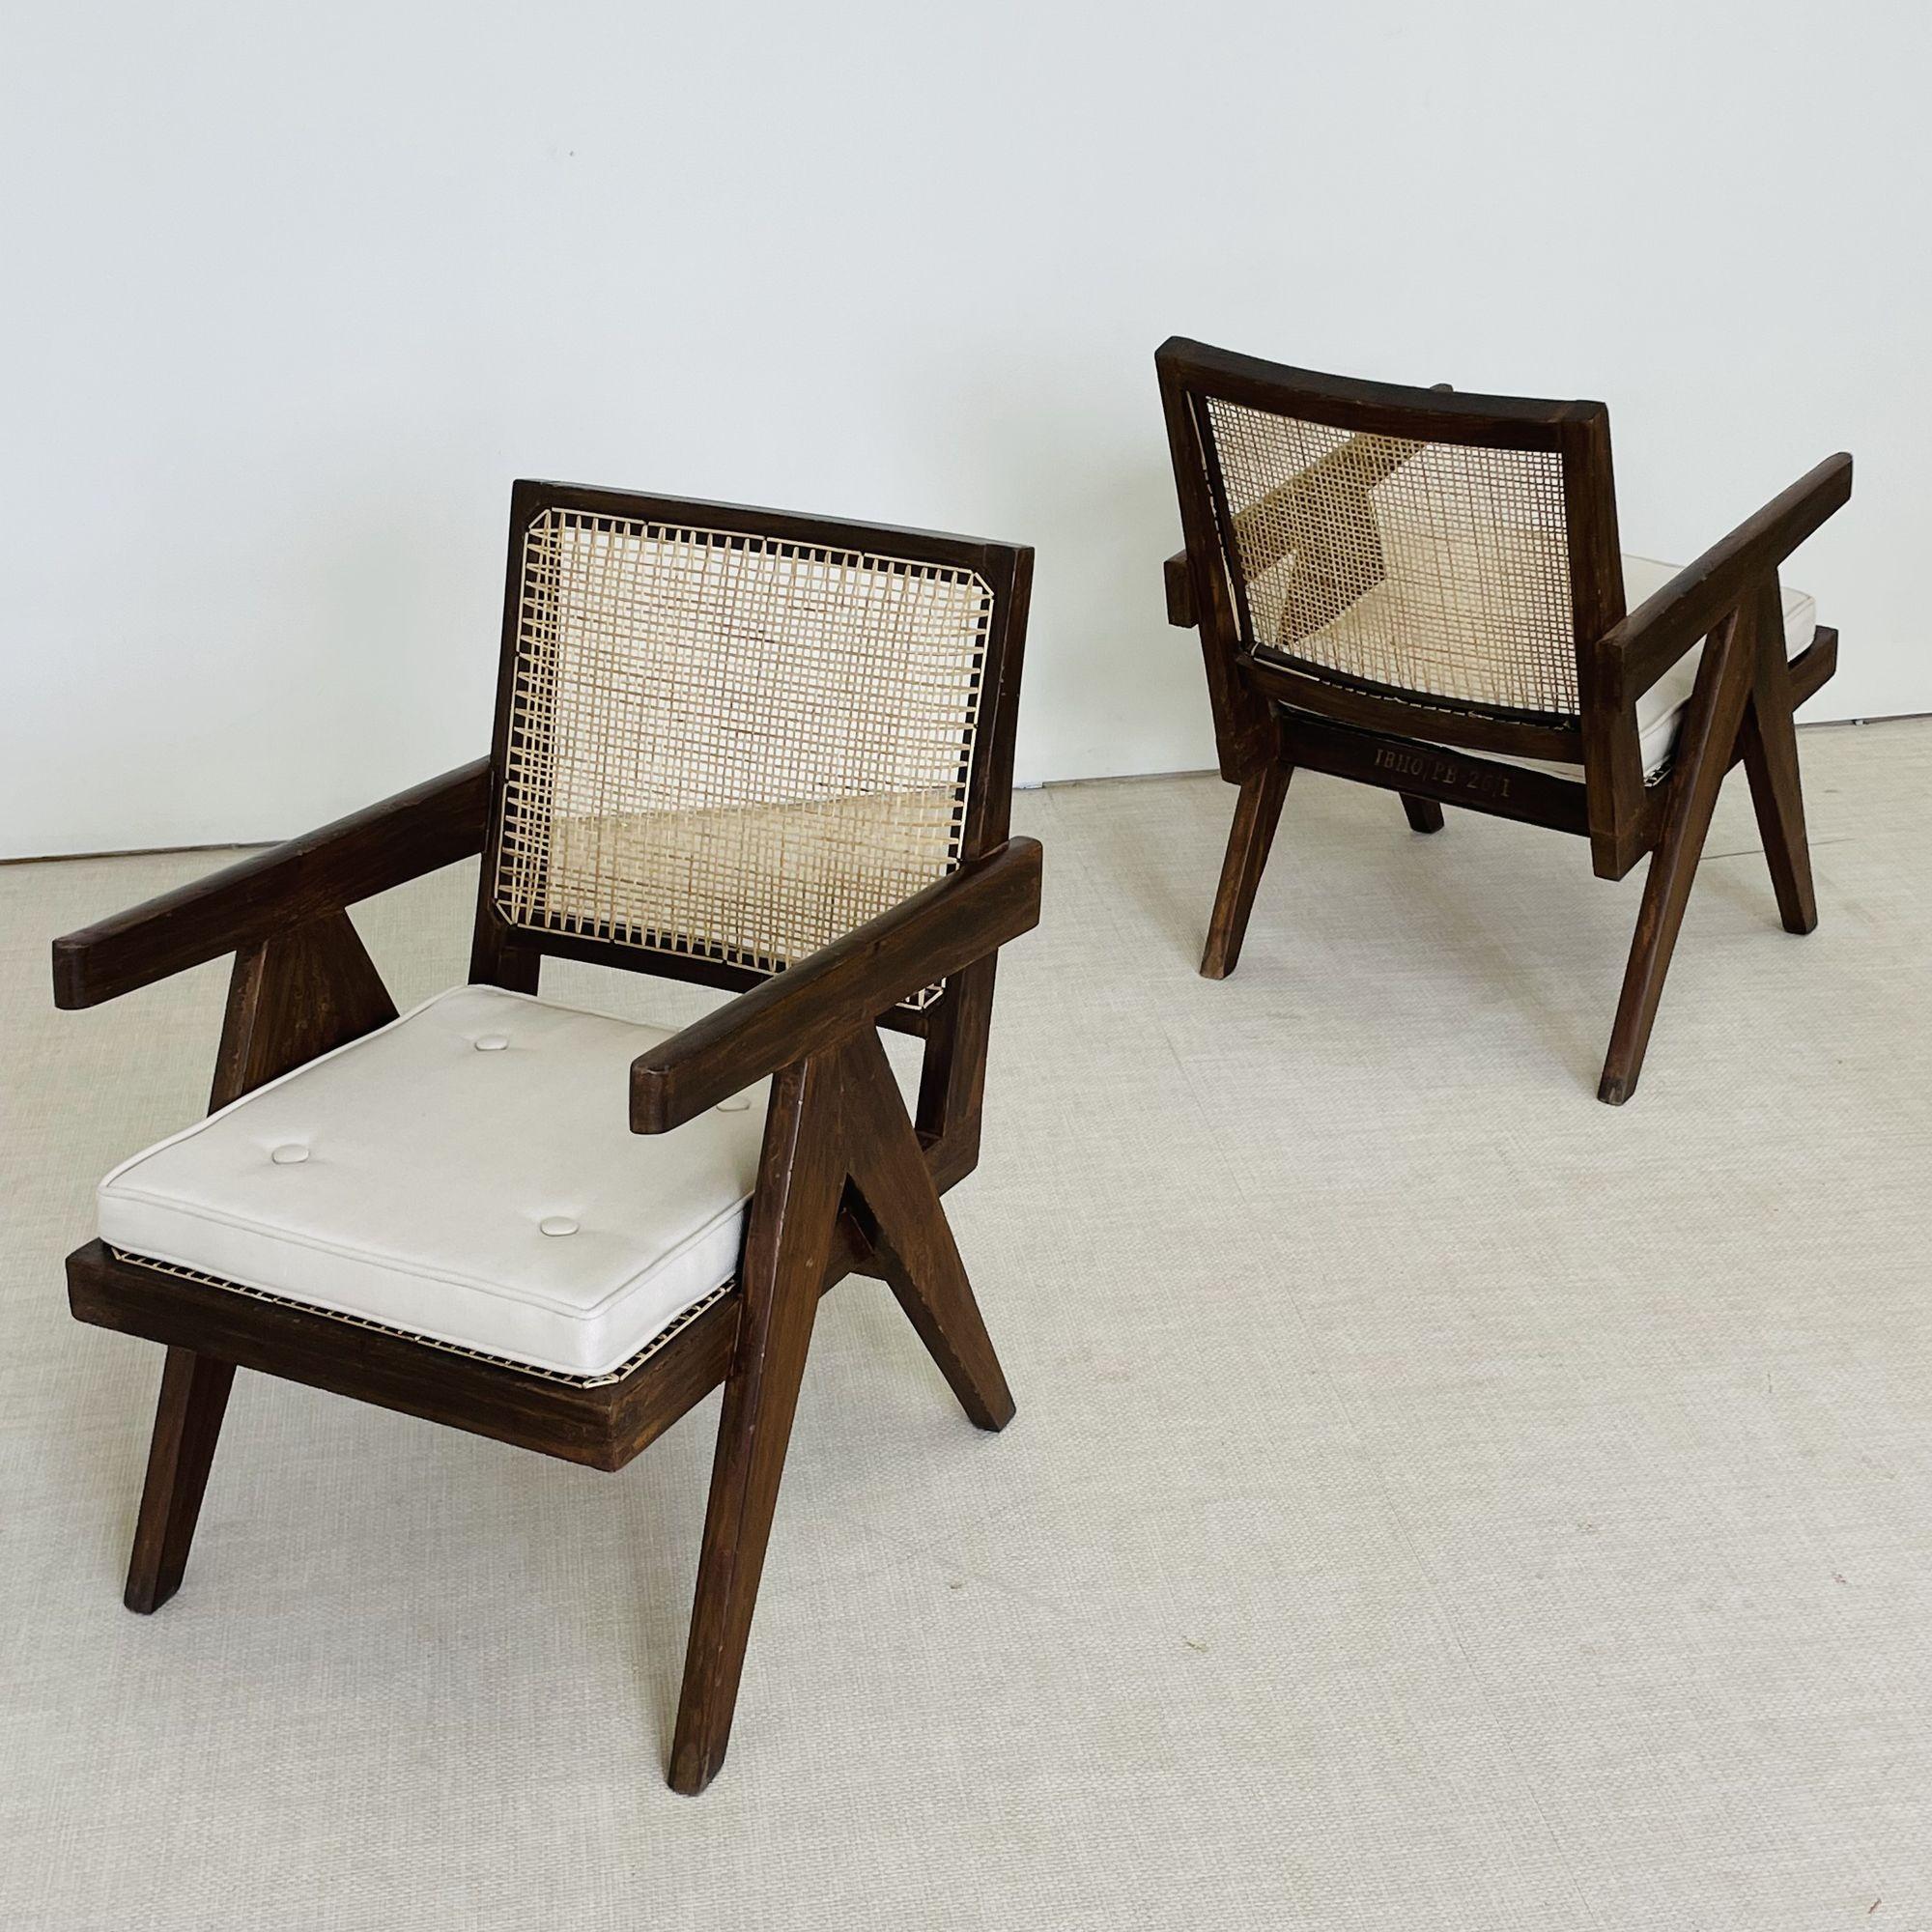 Pierre Jeanneret, French Mid-Century Modern, Lounge Chairs, Cane, Chandigarh

Pierre Jeanneret 'Low Easy' Armchairs, Model PJ-SI-29-A. Iconic pair of teak and cane lounge chairs have a compass-type double side leg assembly and a slanted, slightly